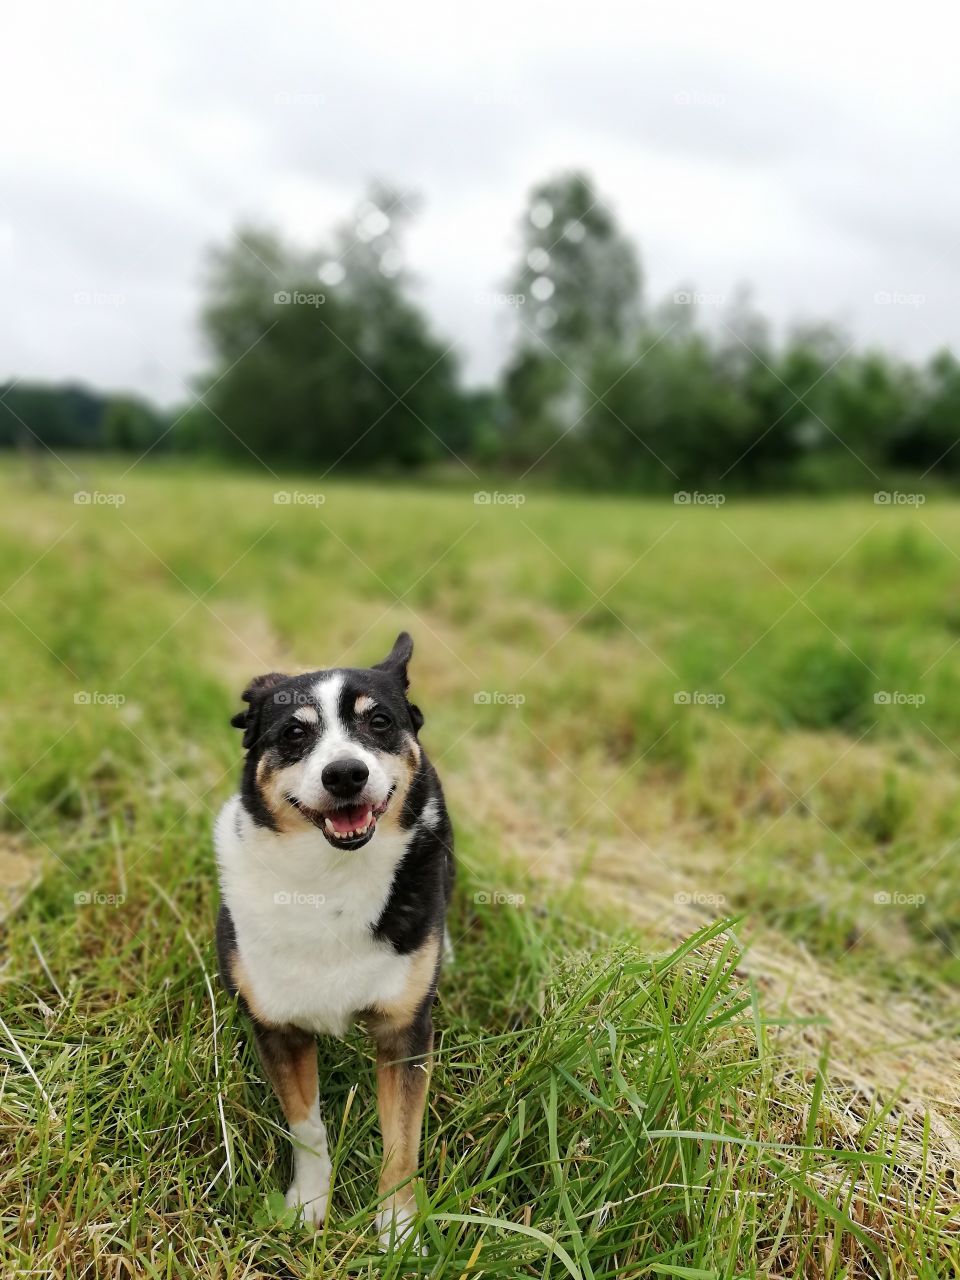 Little dog smiling in a field